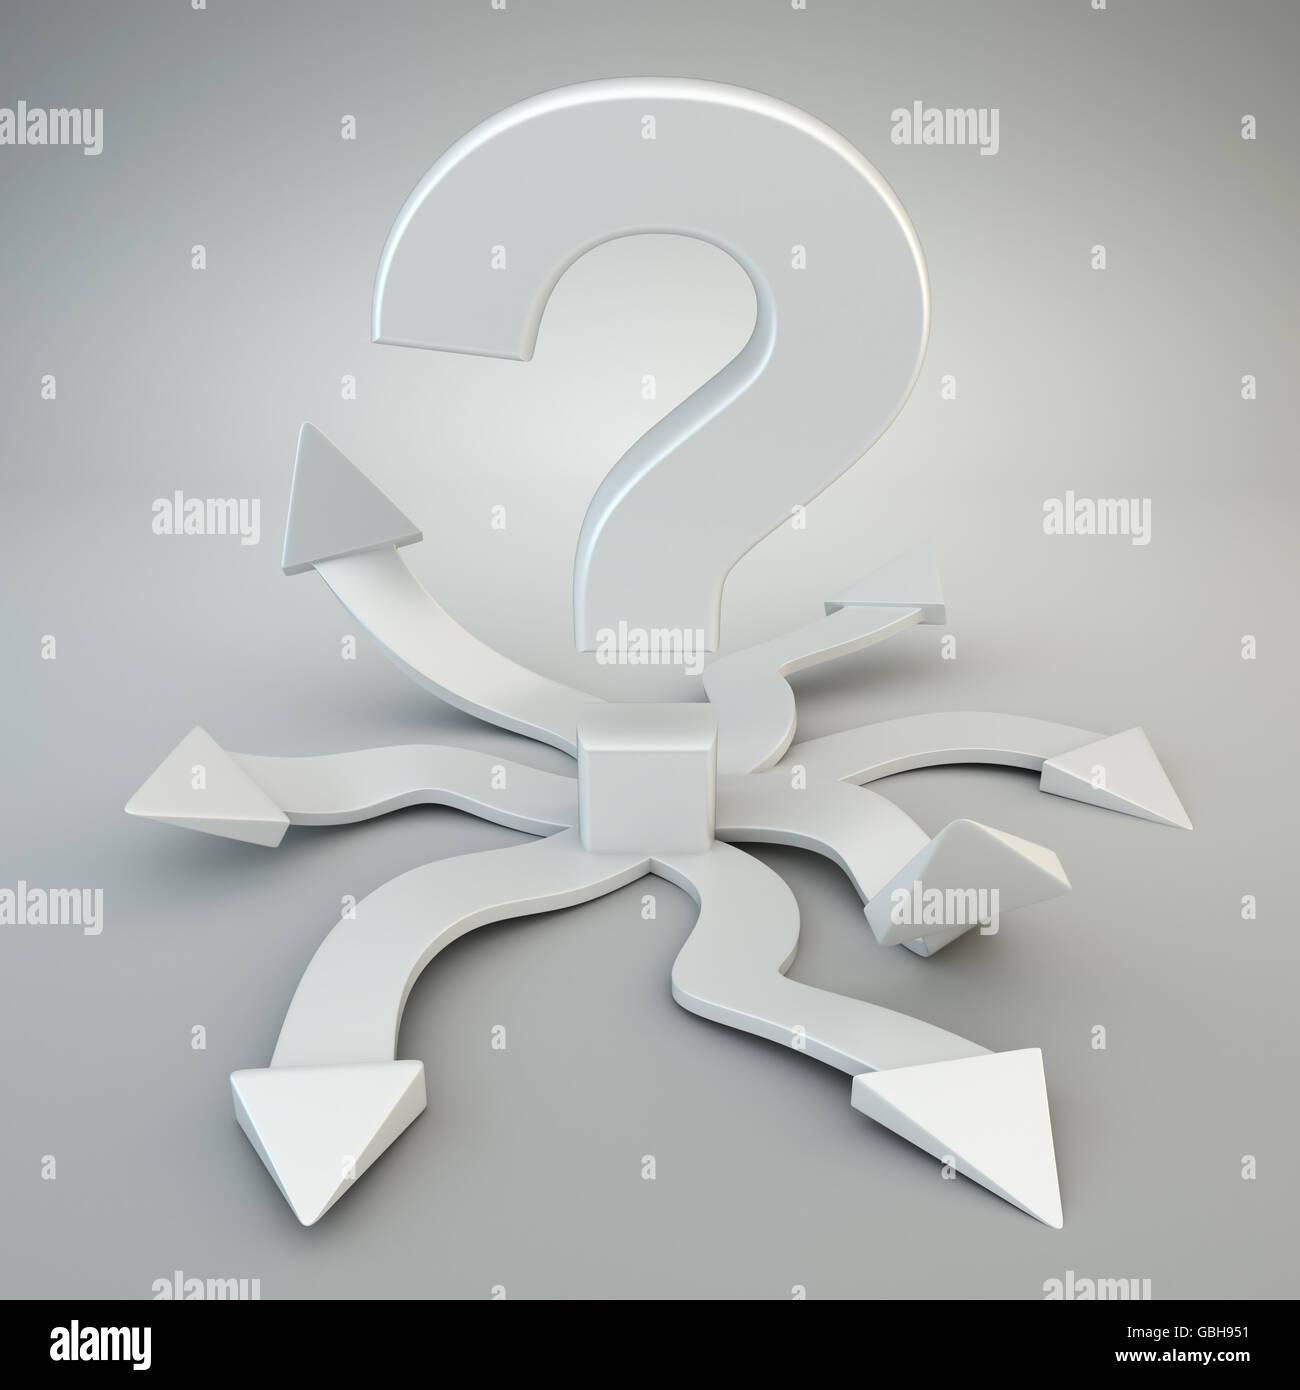 Question mark with many options Stock Photo